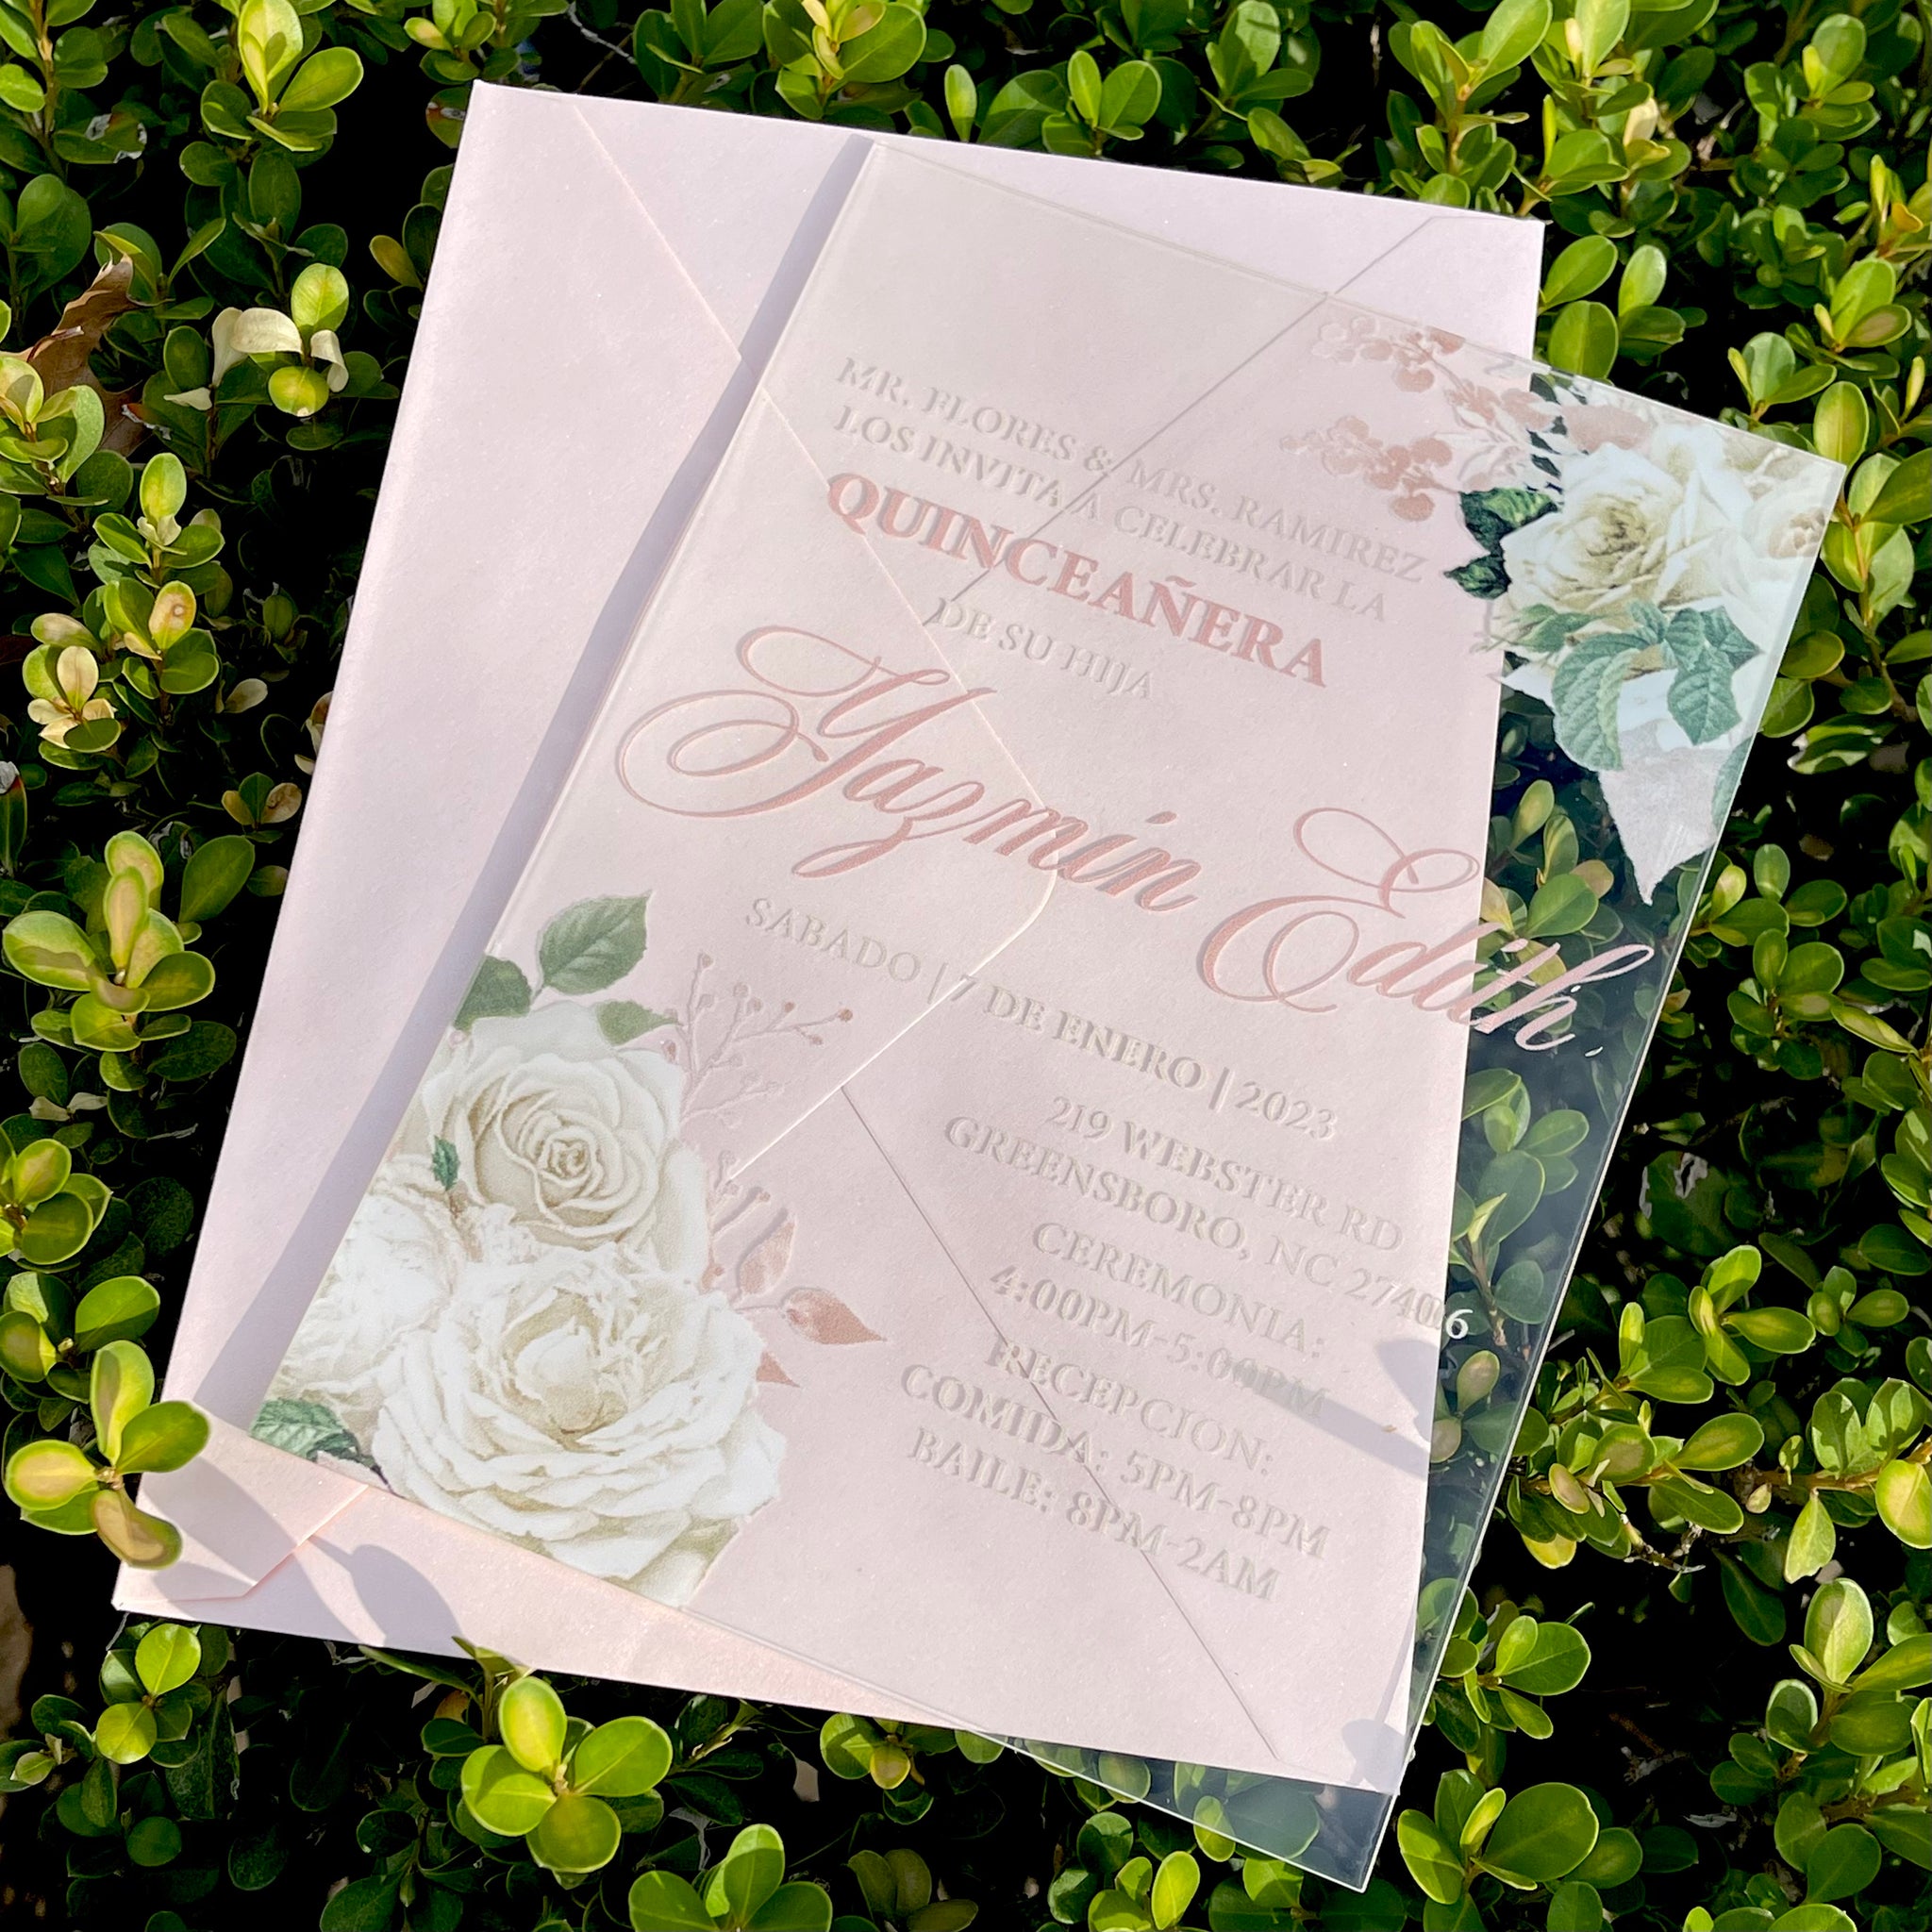 Ivory Floral and Rose Gold Acrylic Invitation – Invitations by Luis Sanchez